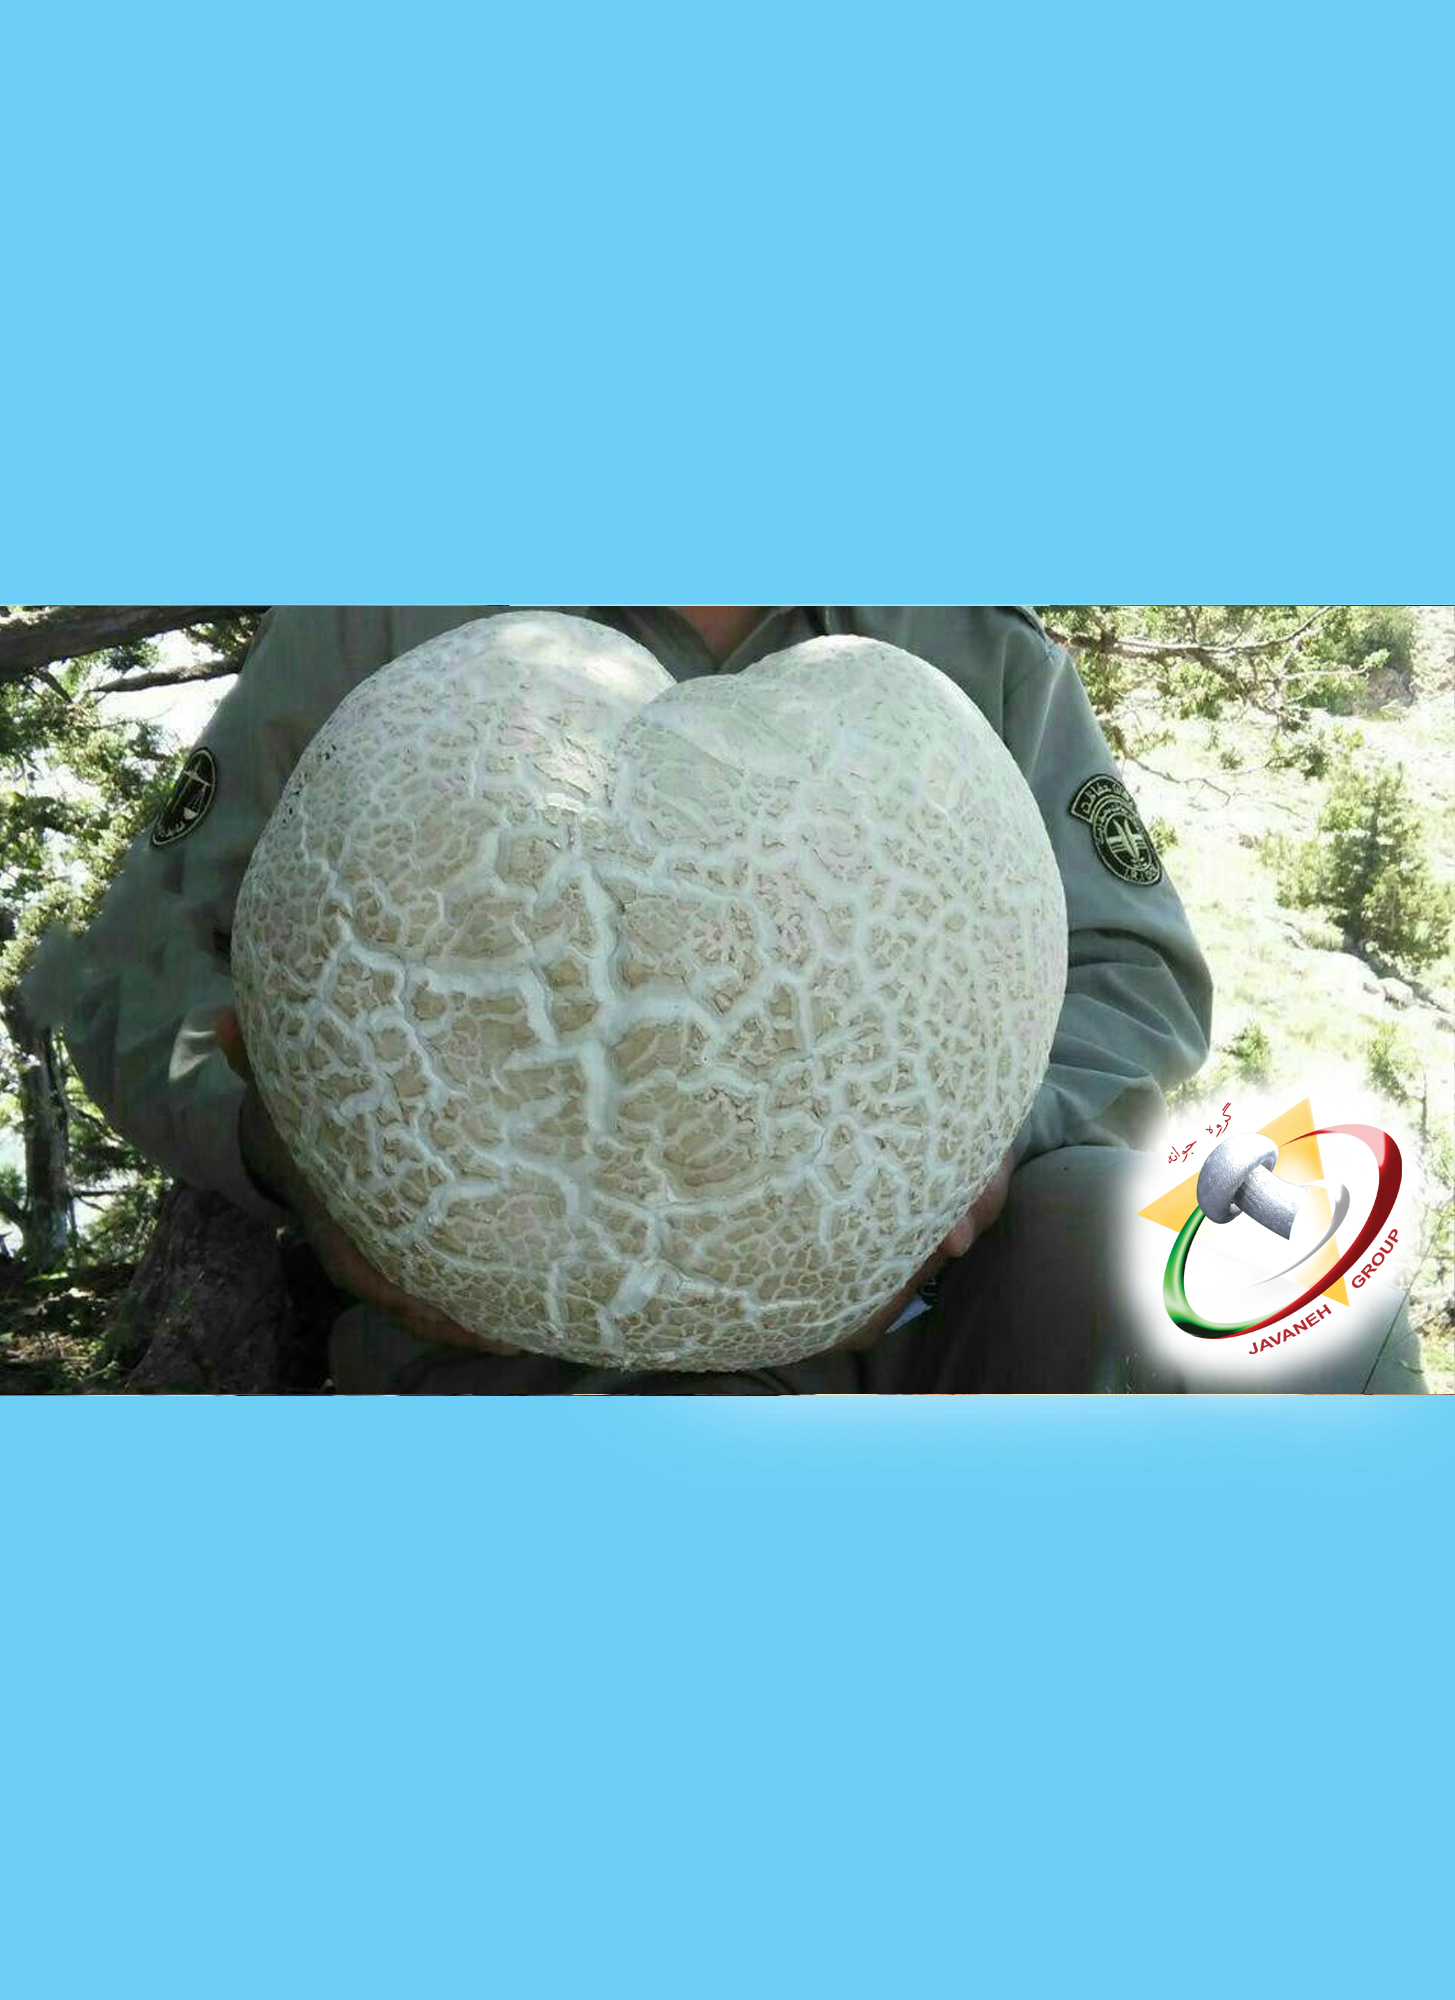 The Biggest Mushroom Finded in IRAN